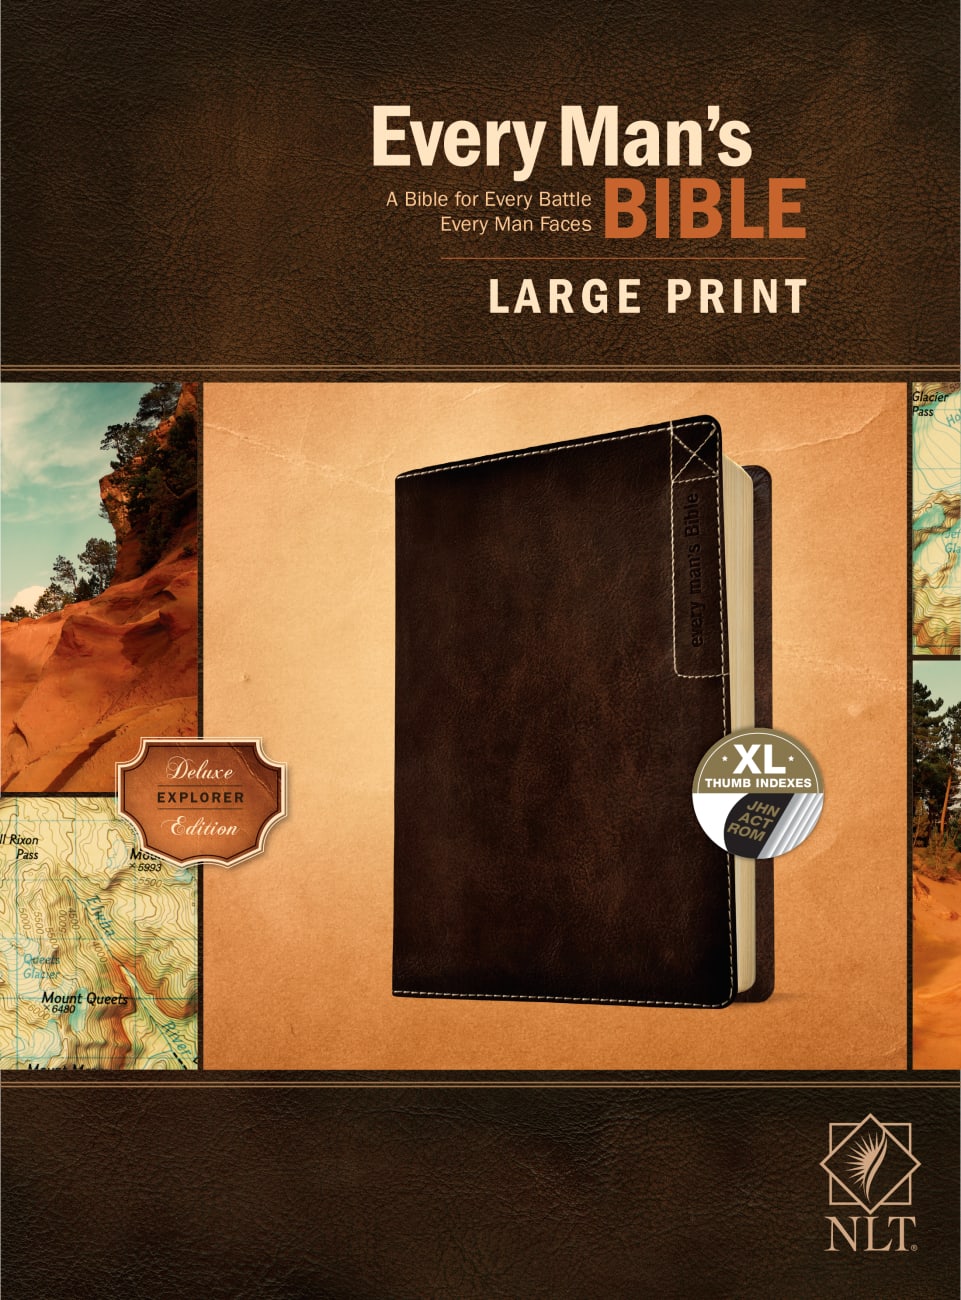 NLT Every Man's Bible Large Print Deluxe Explorer Edition Indexed Rustic Brown Imitation Leather